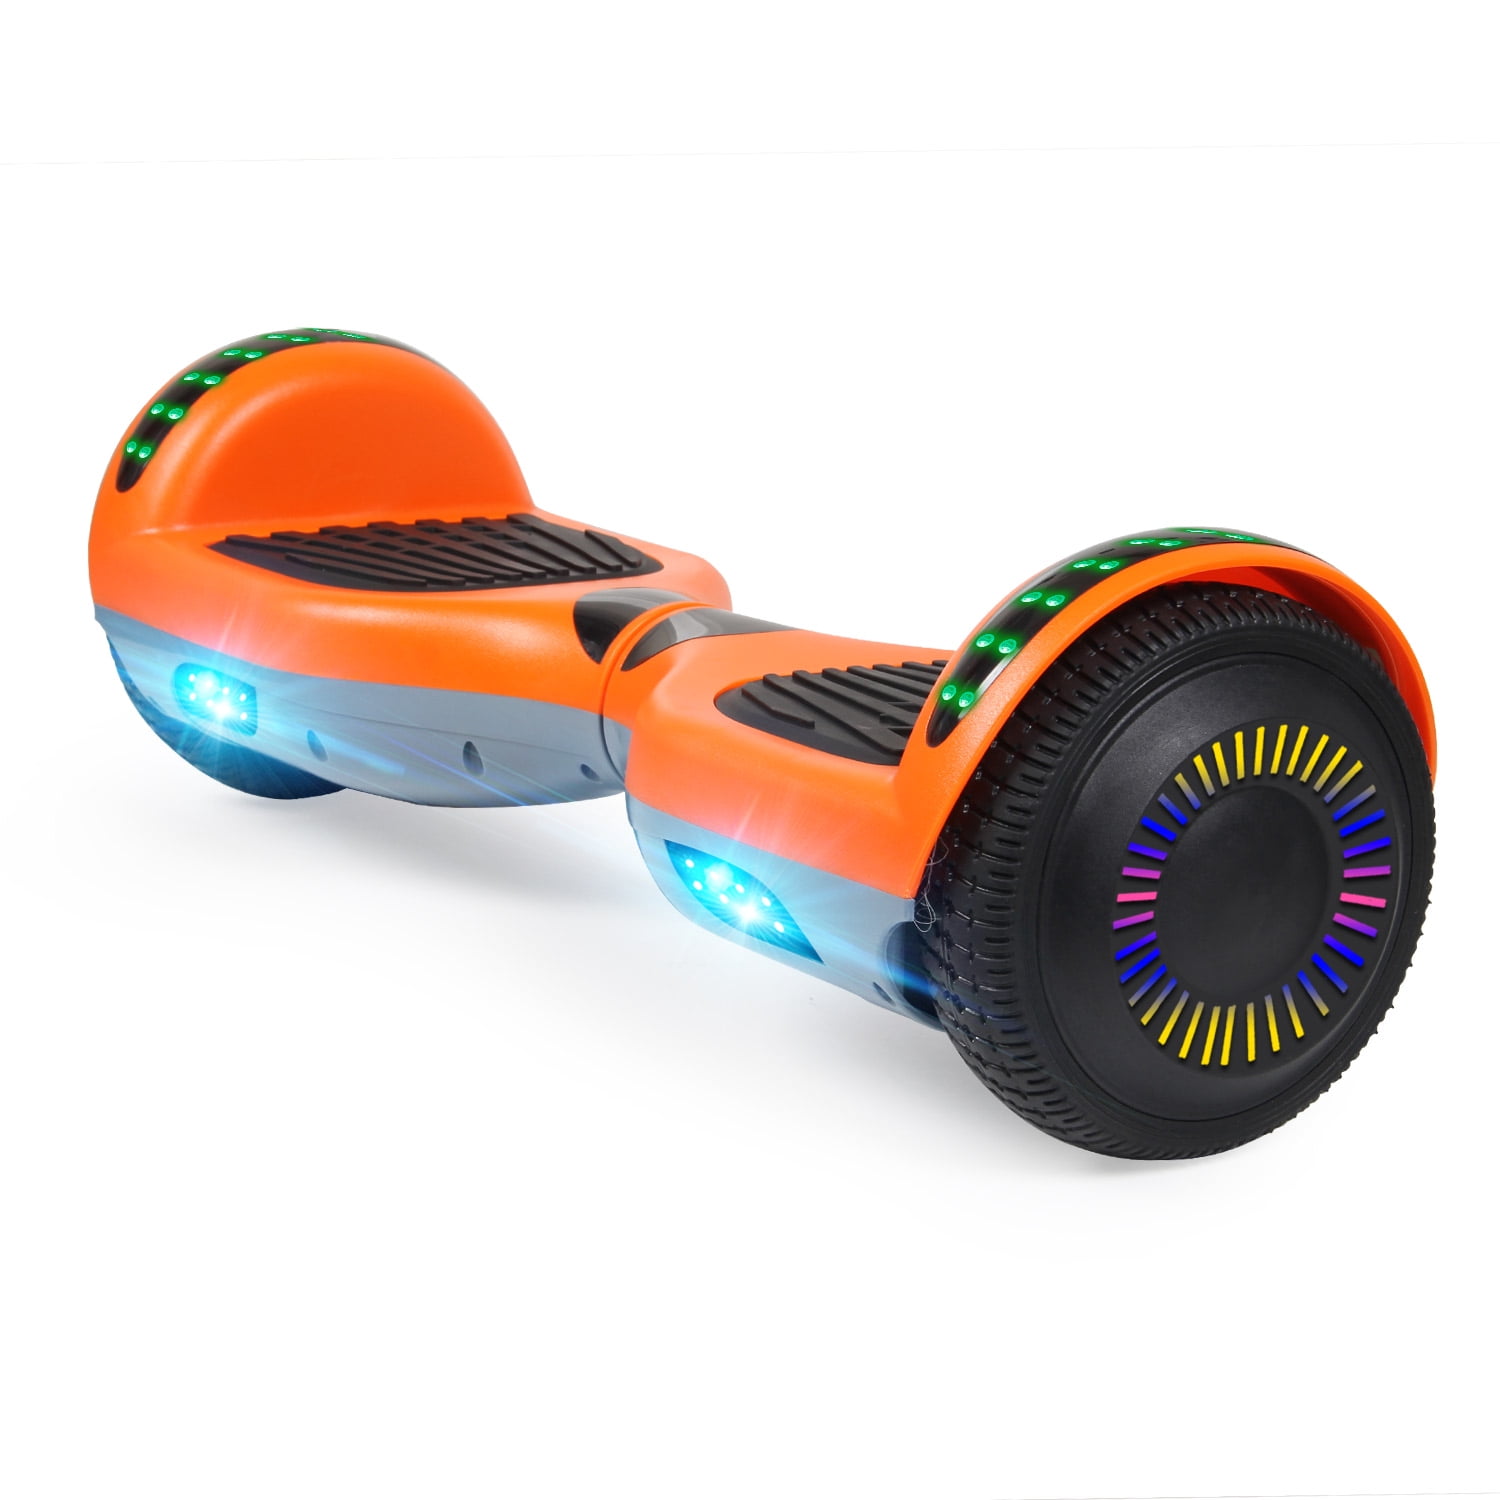 jolege Self Balancing Hoverboard for Kids 6.5 hoverboards w/Bluetooth and LED Light UL2272 Certified 